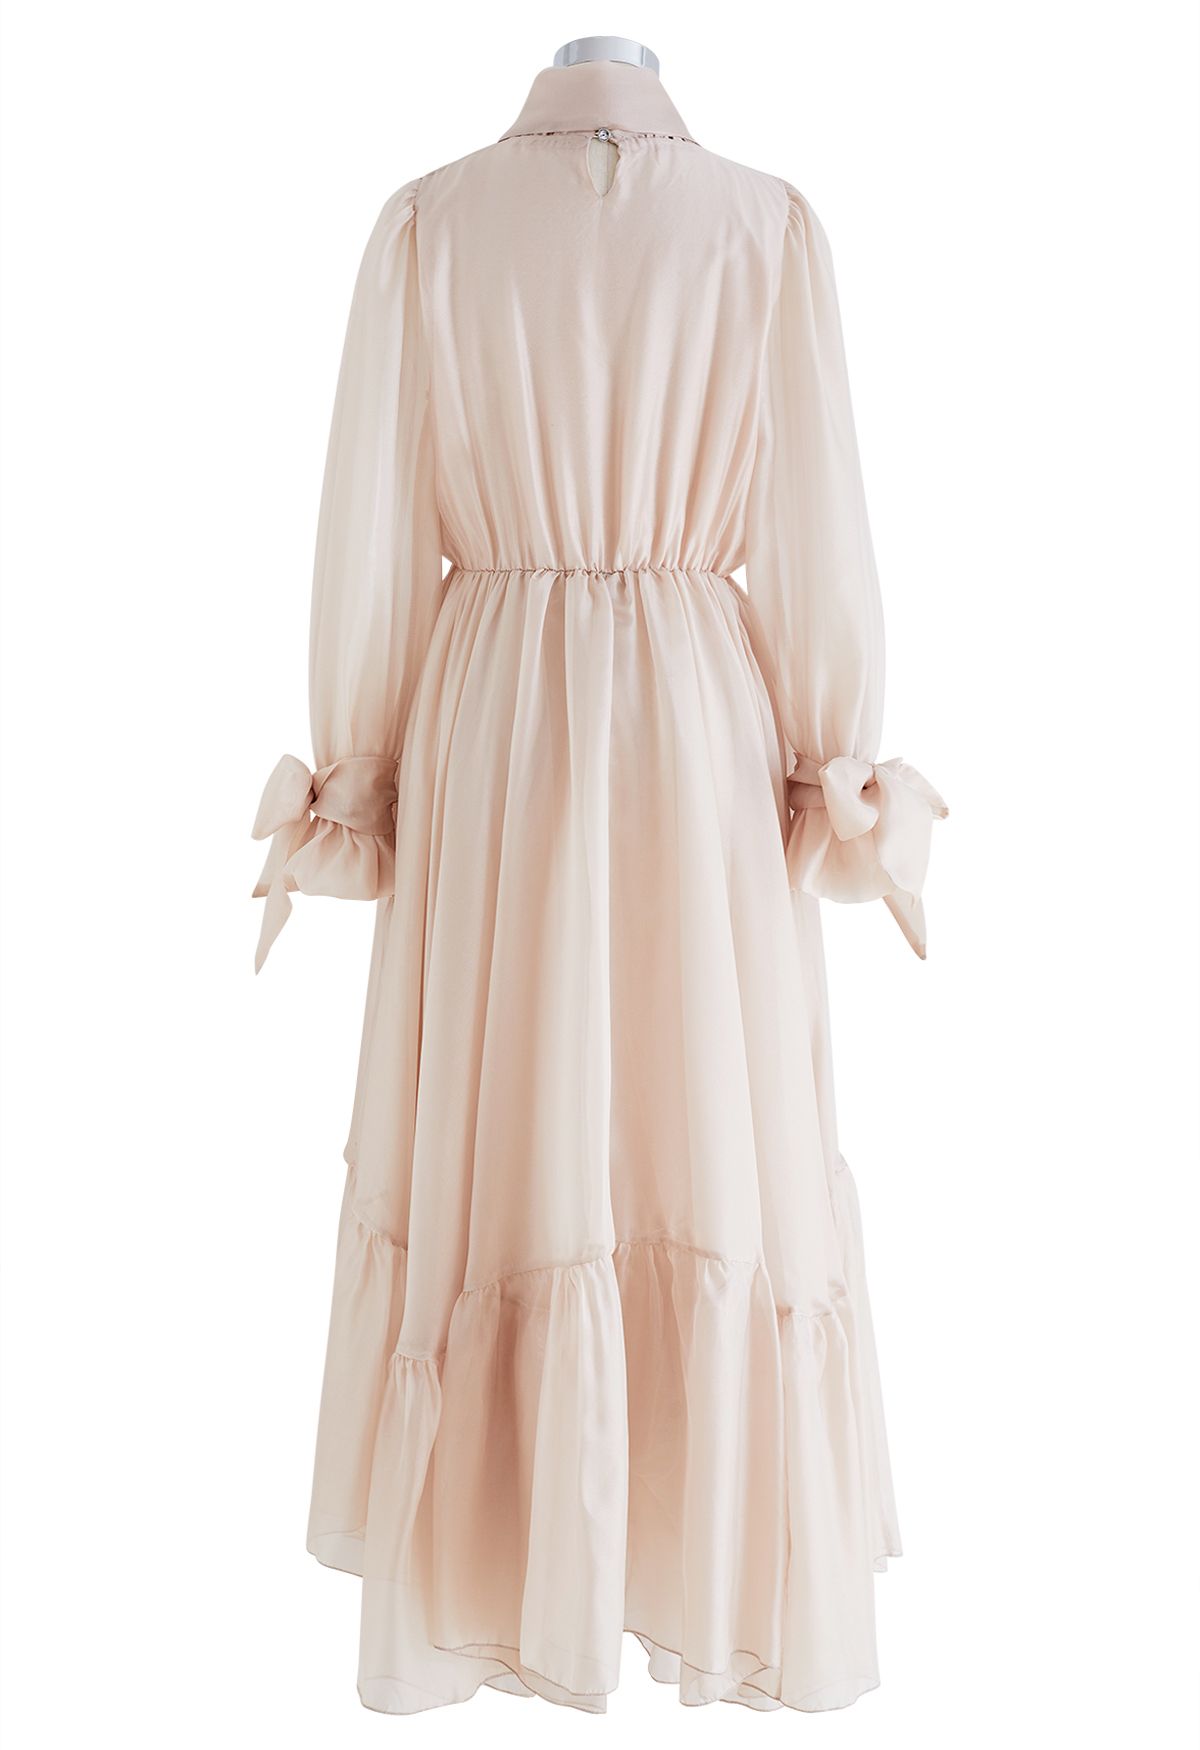 Gorgeous Bow Neck Sheer Mesh Frilling Dress in Apricot - Retro, Indie ...